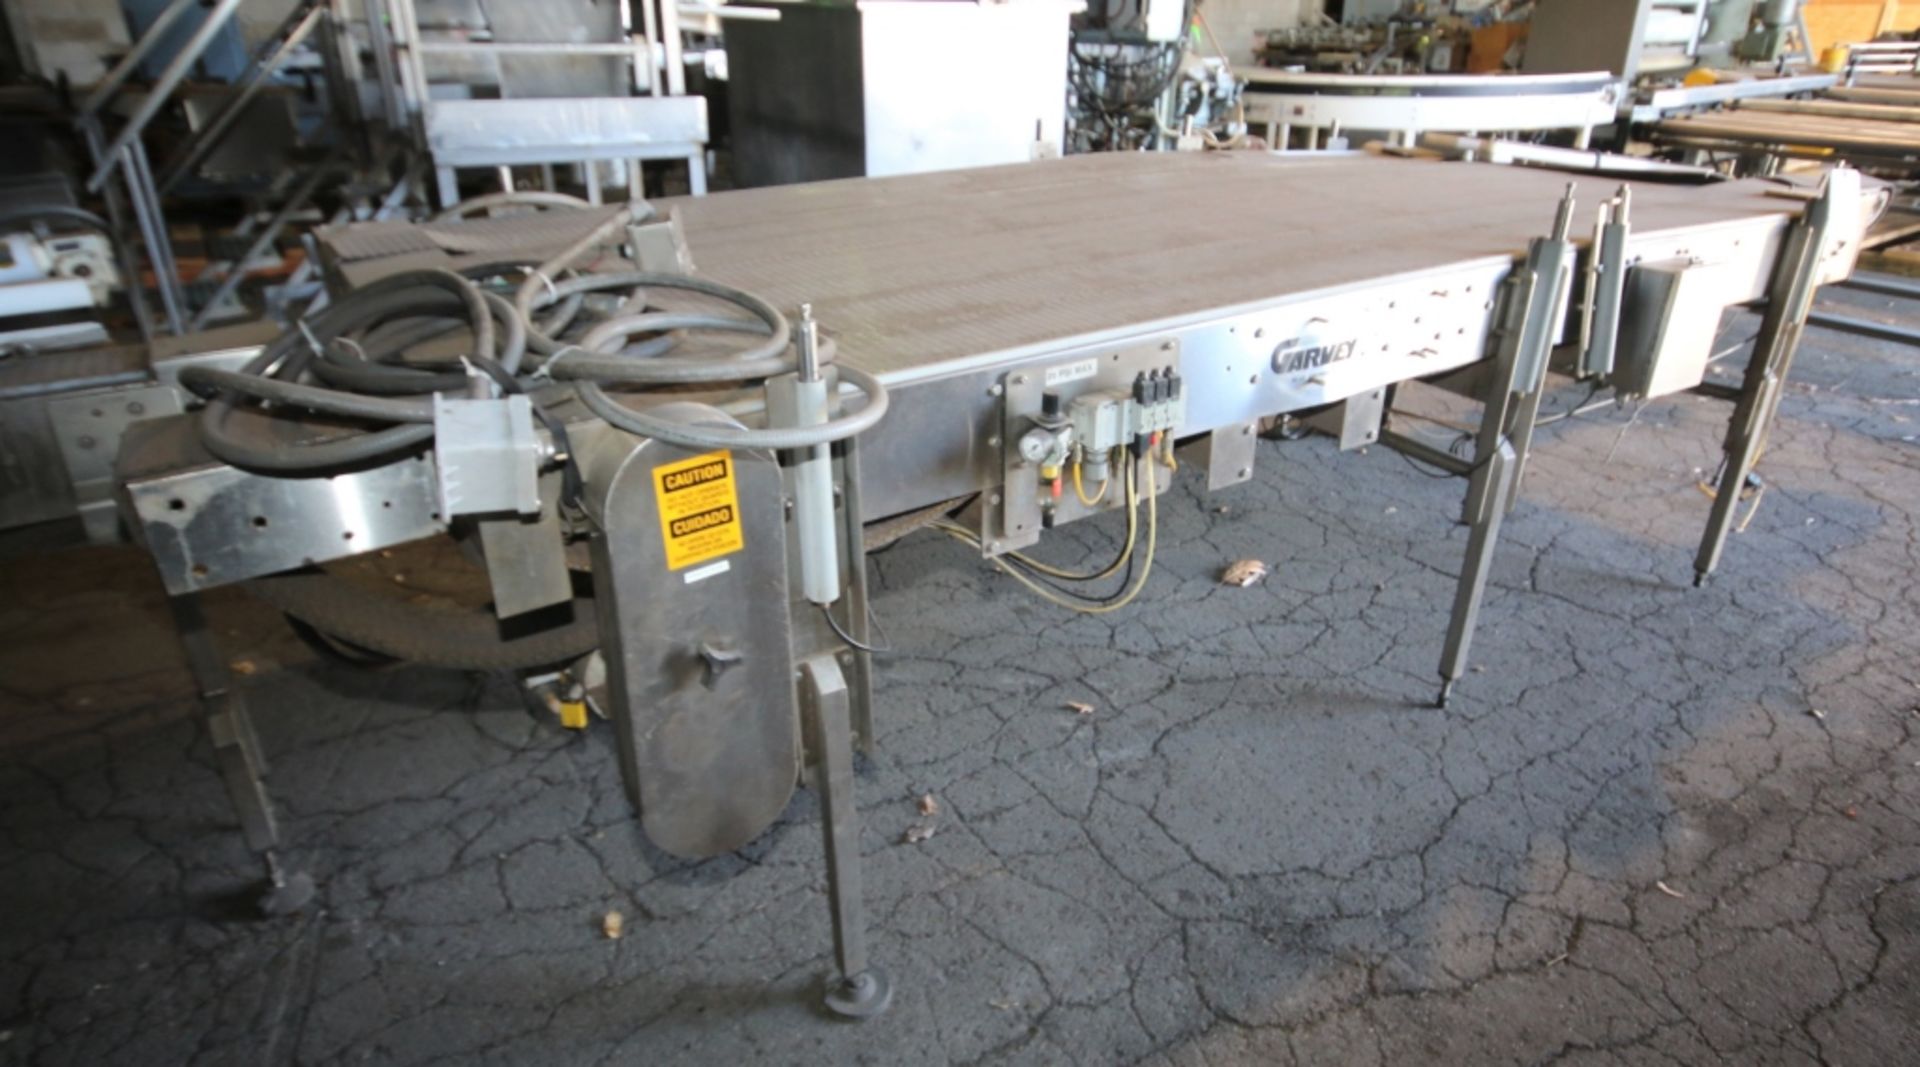 Garvey 10 ft L x 53" W x 39" H S/S ConveyorAccumulation Table, with 6 Section Top Plastic Chain with - Image 8 of 10